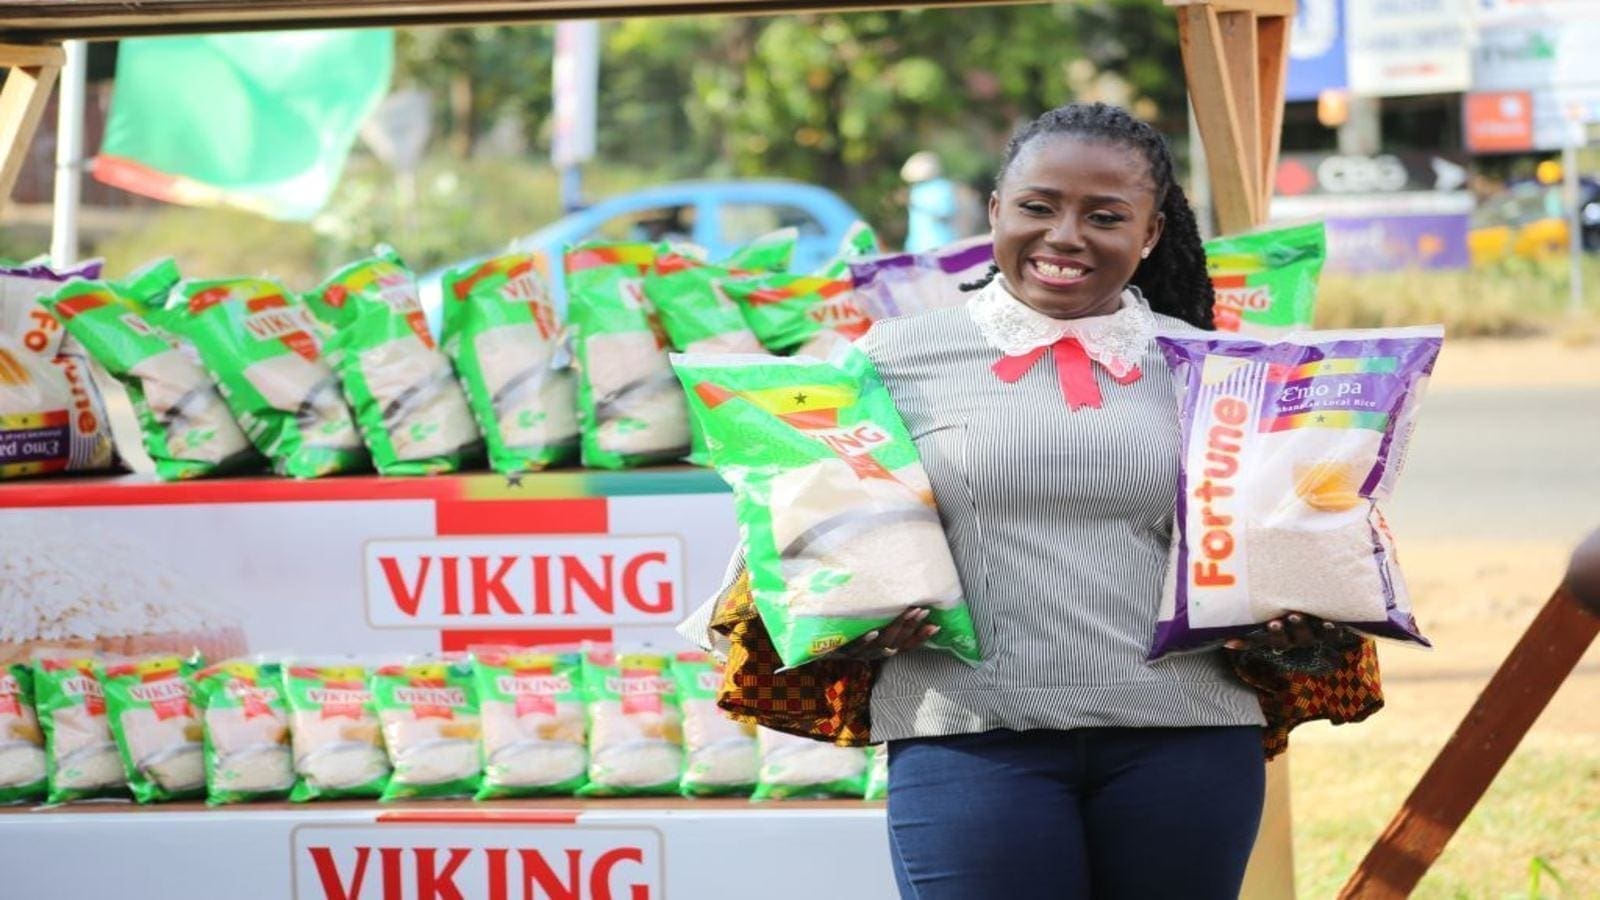 Wilmar Africa launches two new rice brands in Ghana joining in drive towards self-sufficiency